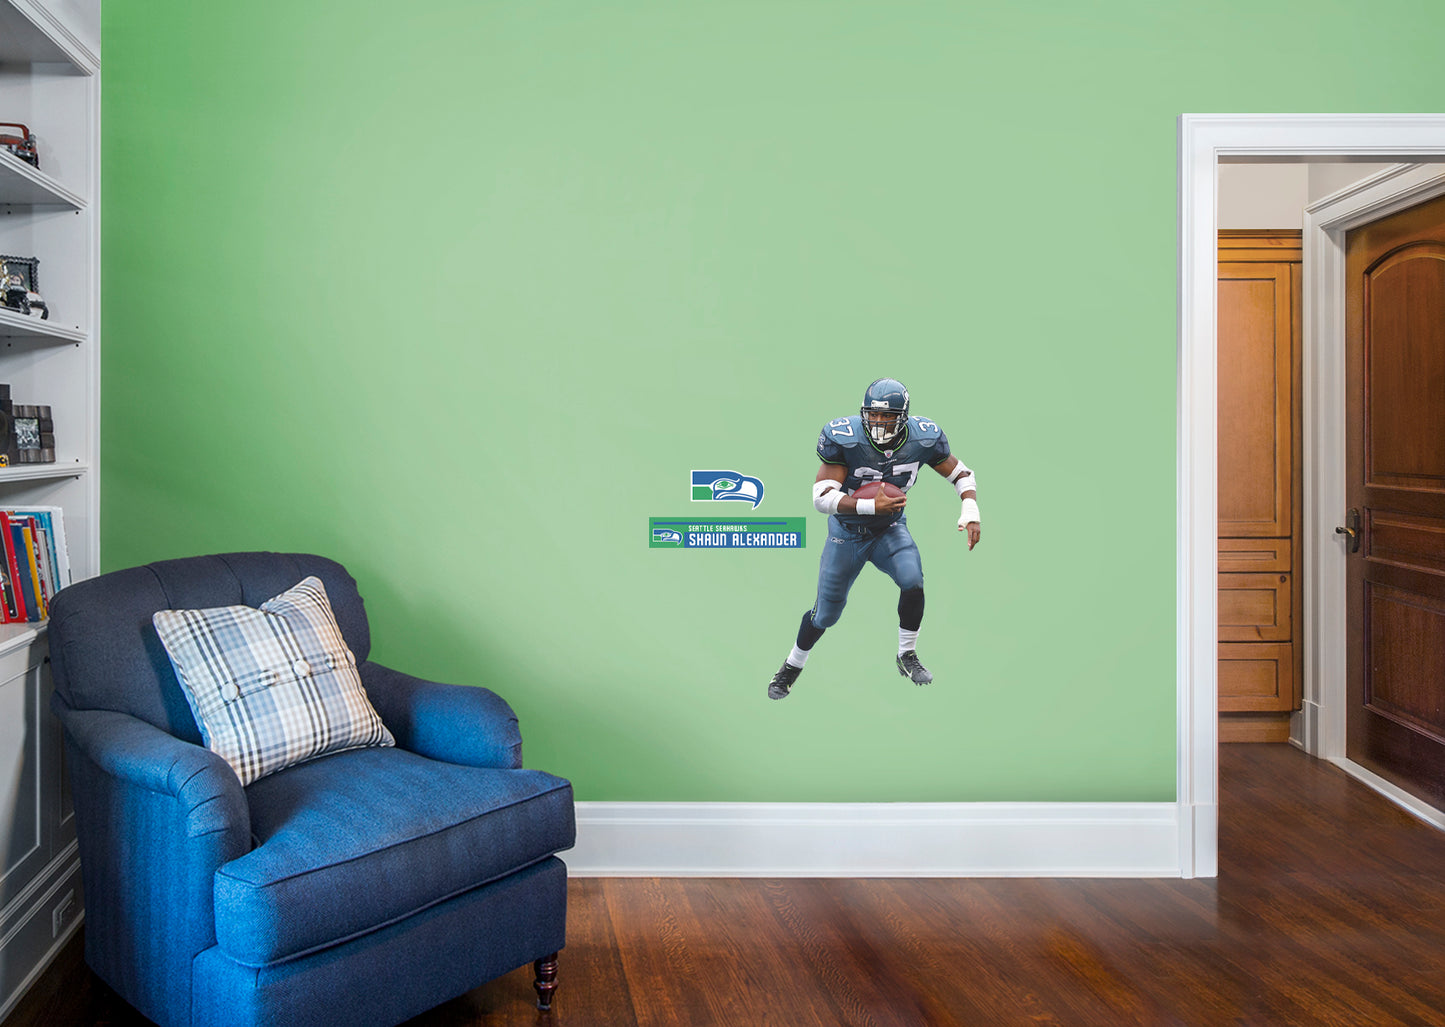 Seattle Seahawks: Shaun Alexander 2021 Legend        - Officially Licensed NFL Removable Wall   Adhesive Decal